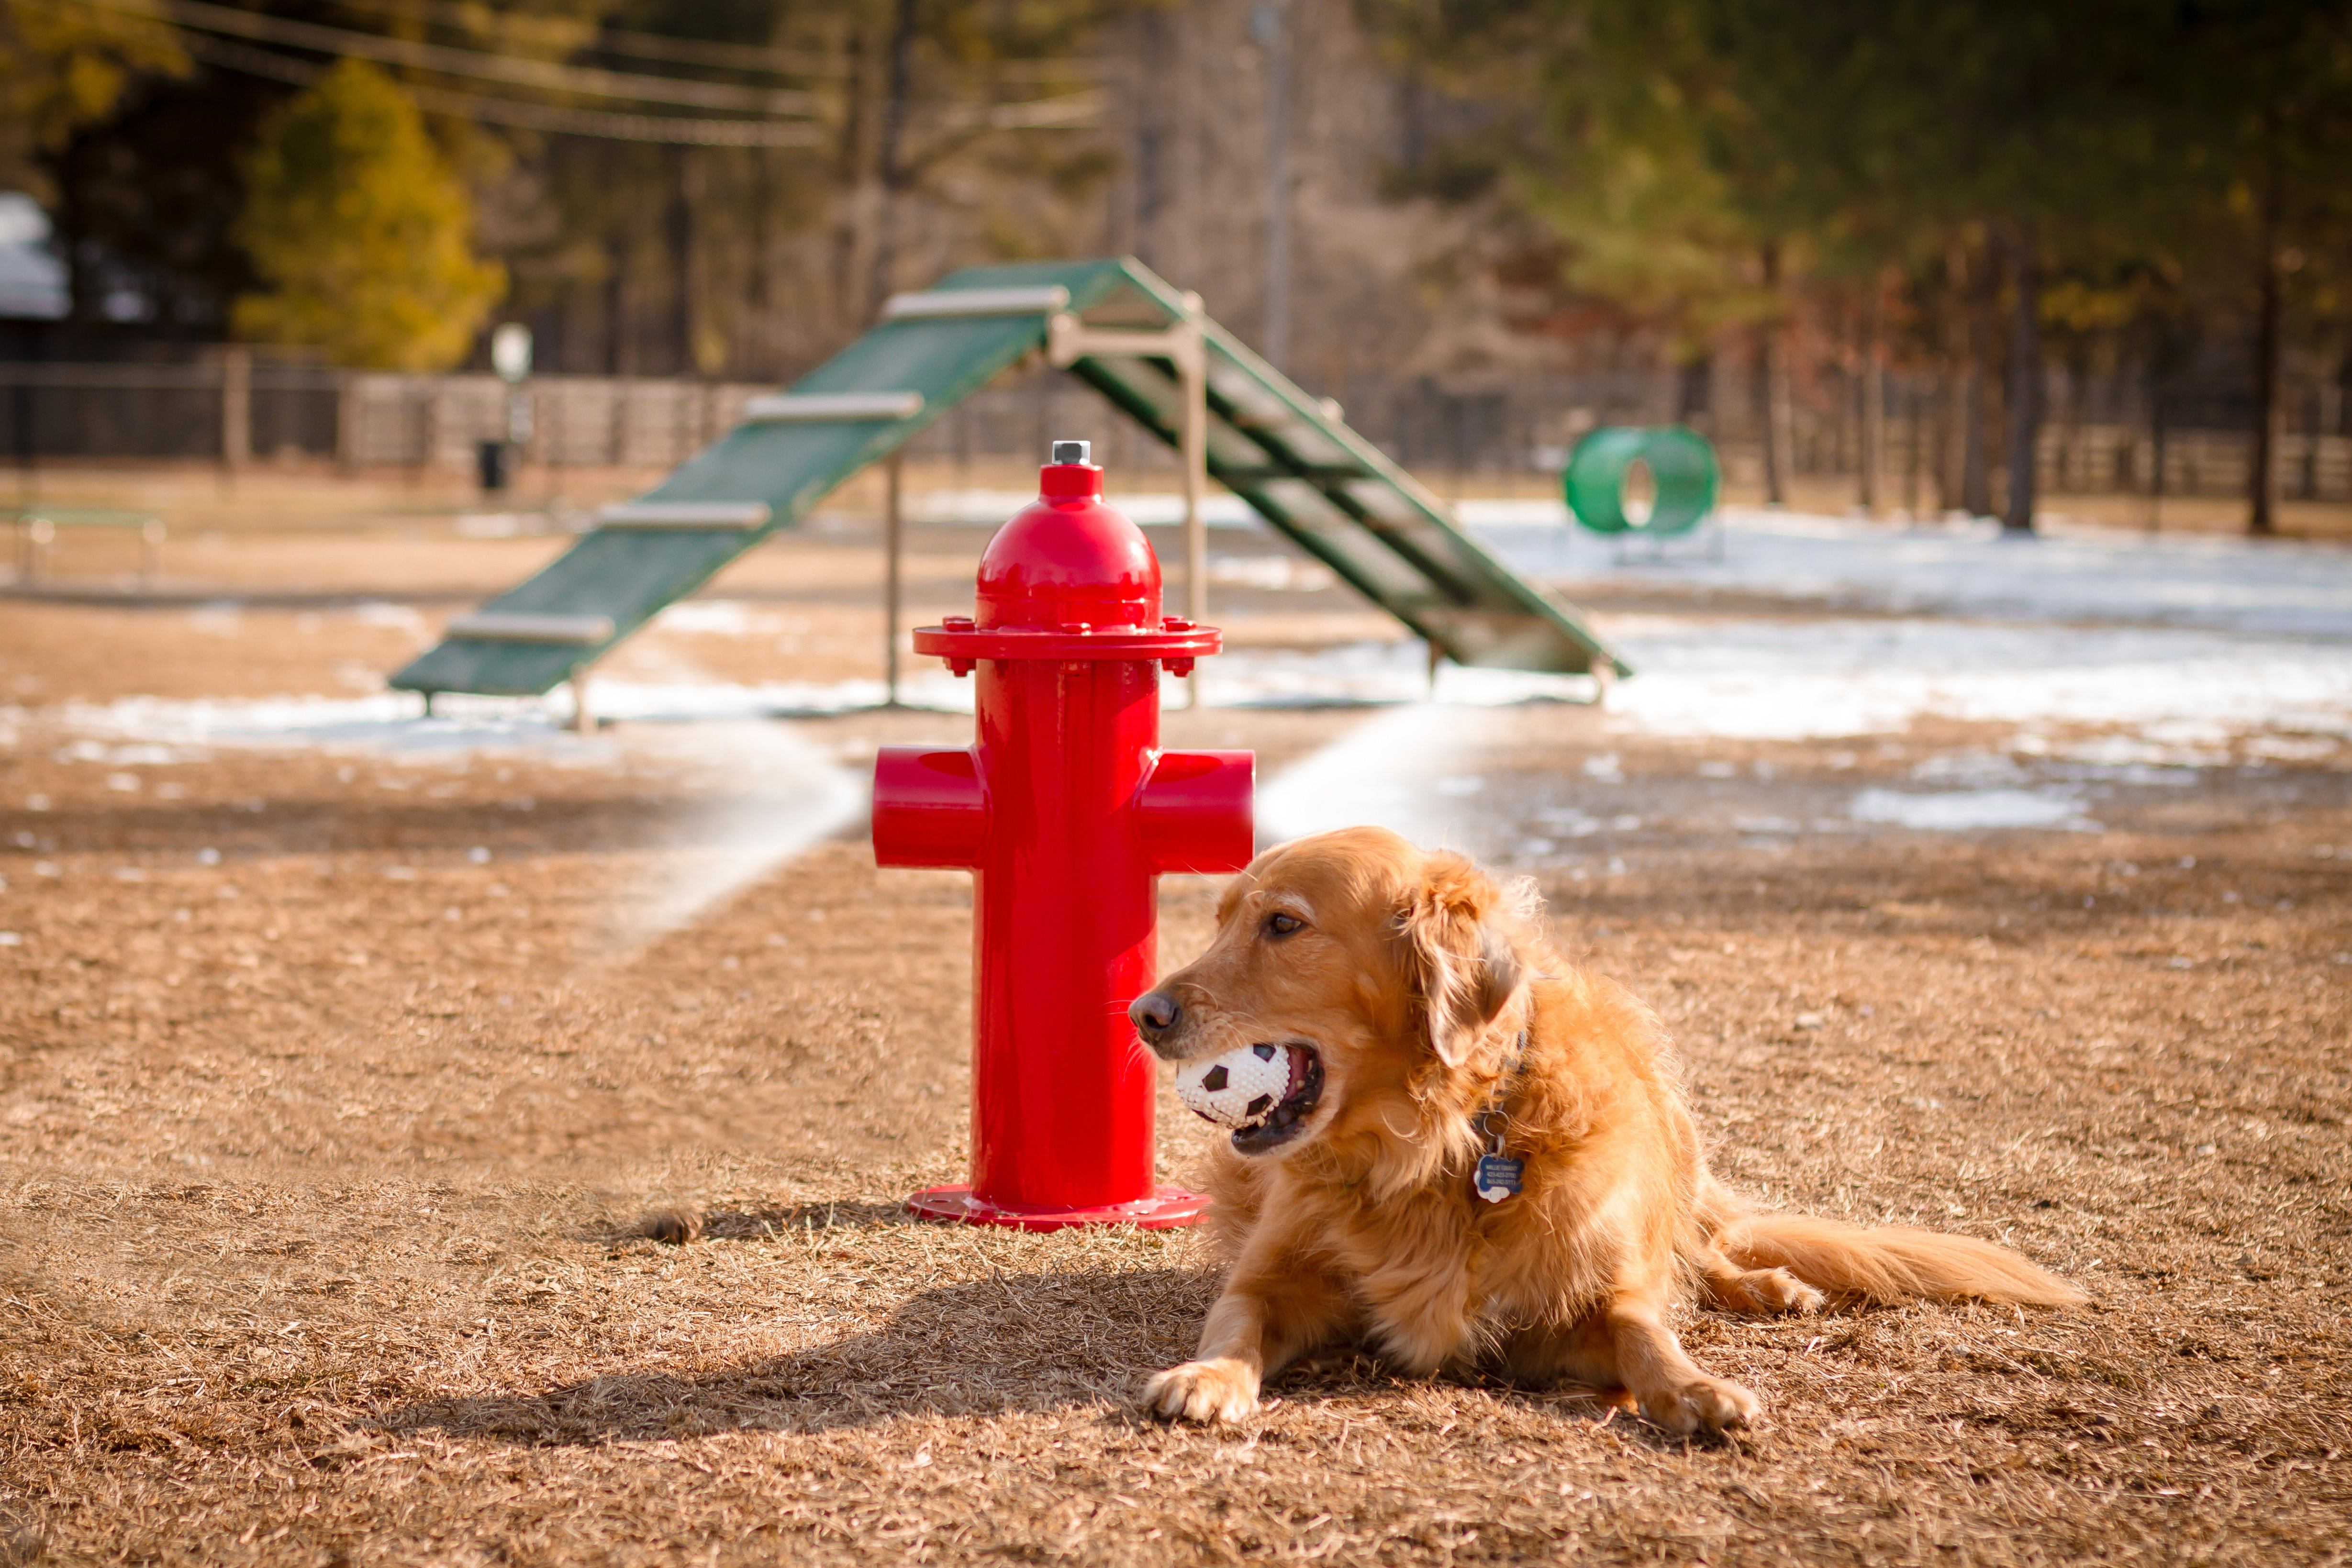 BarkPark by UltraSite Misting Fire Hydrant